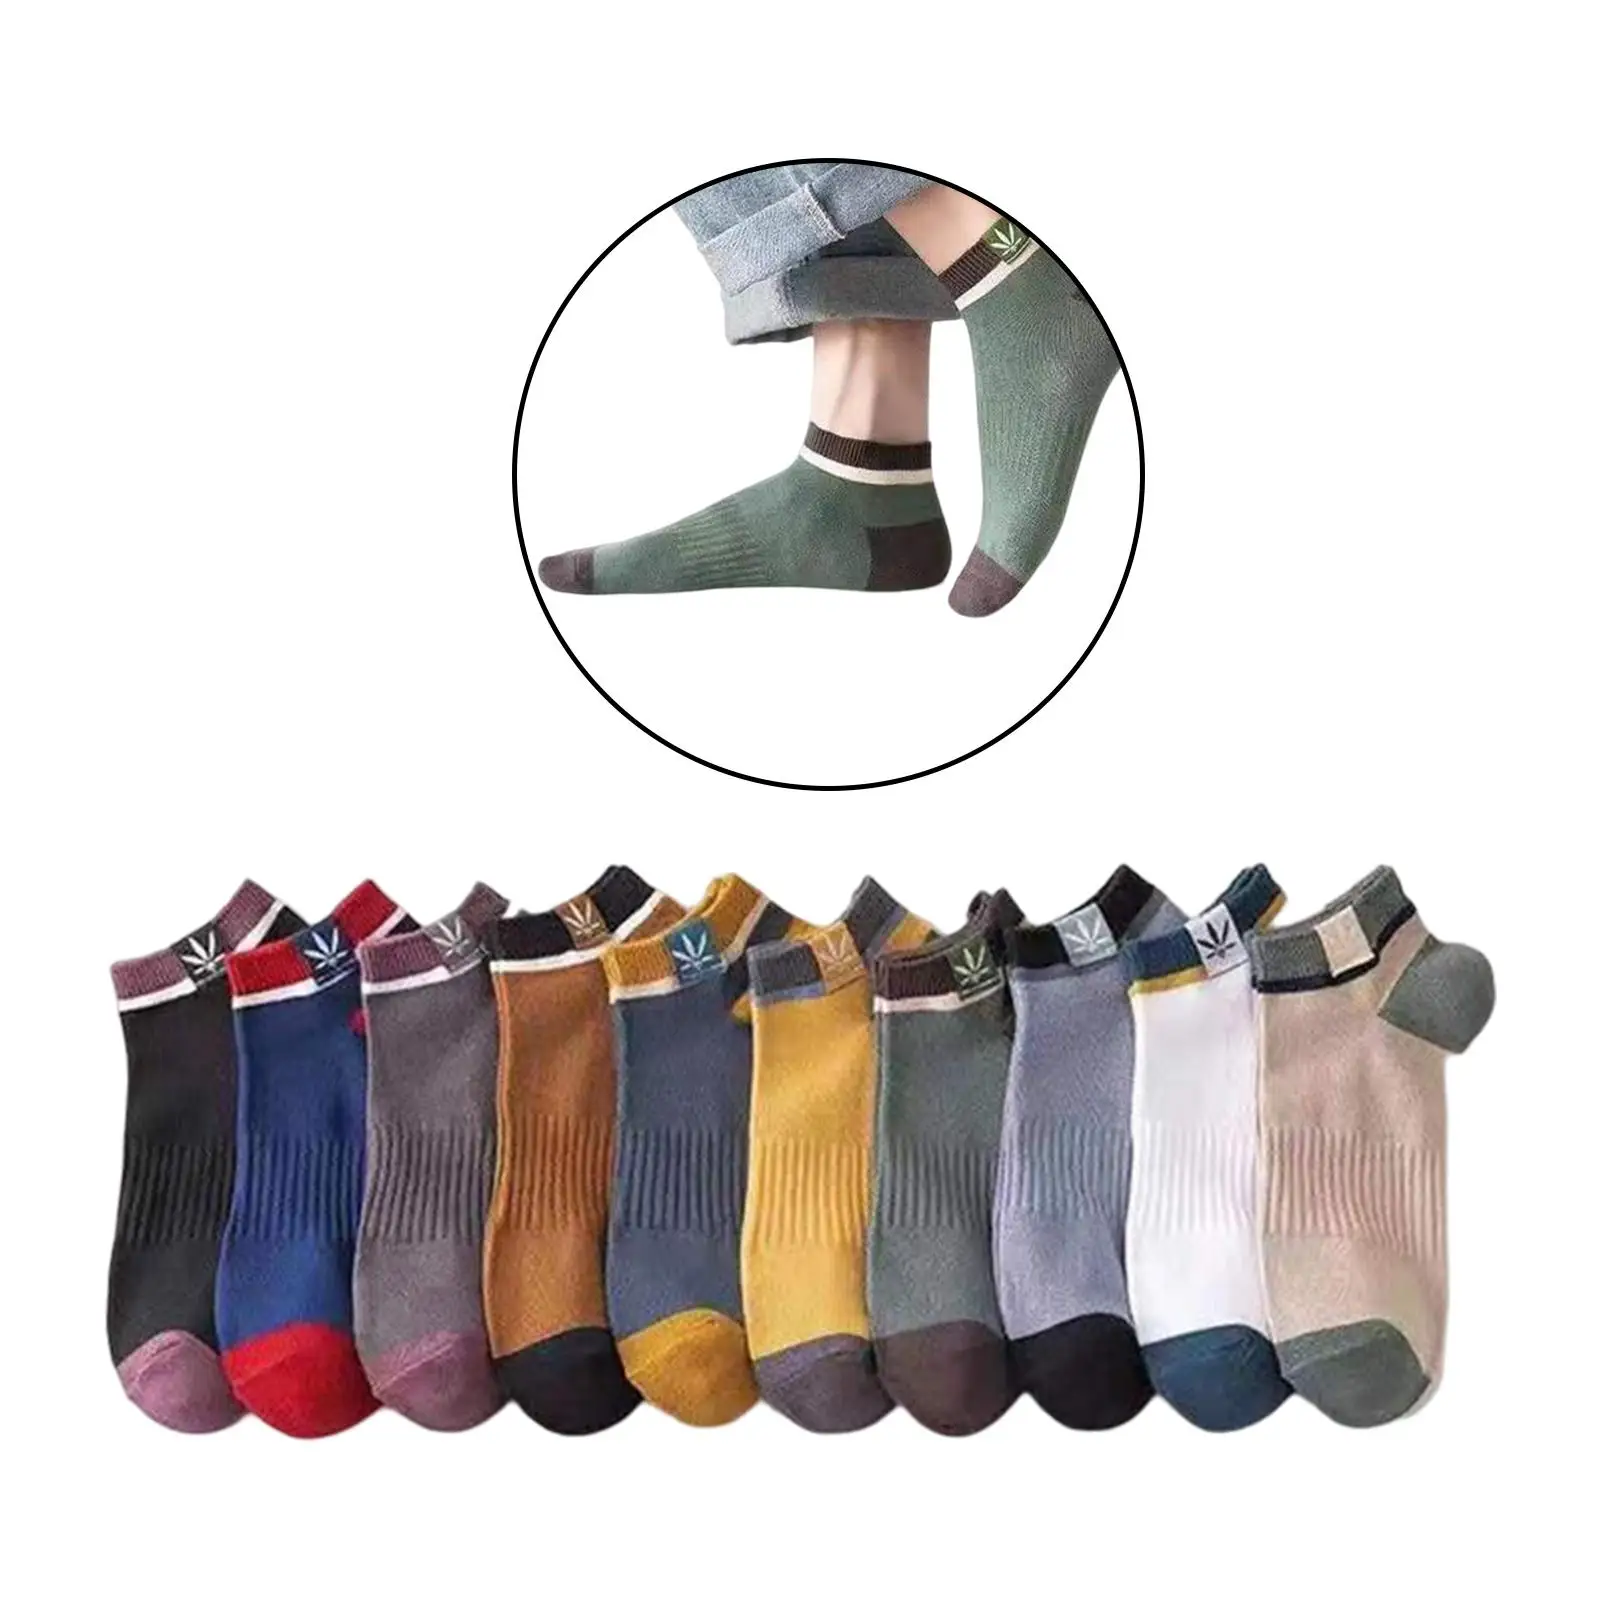 10 Pairs Mens Ankle Socks Soft Low Cut Sweat Wicking Casual Socks for Sports Men Women